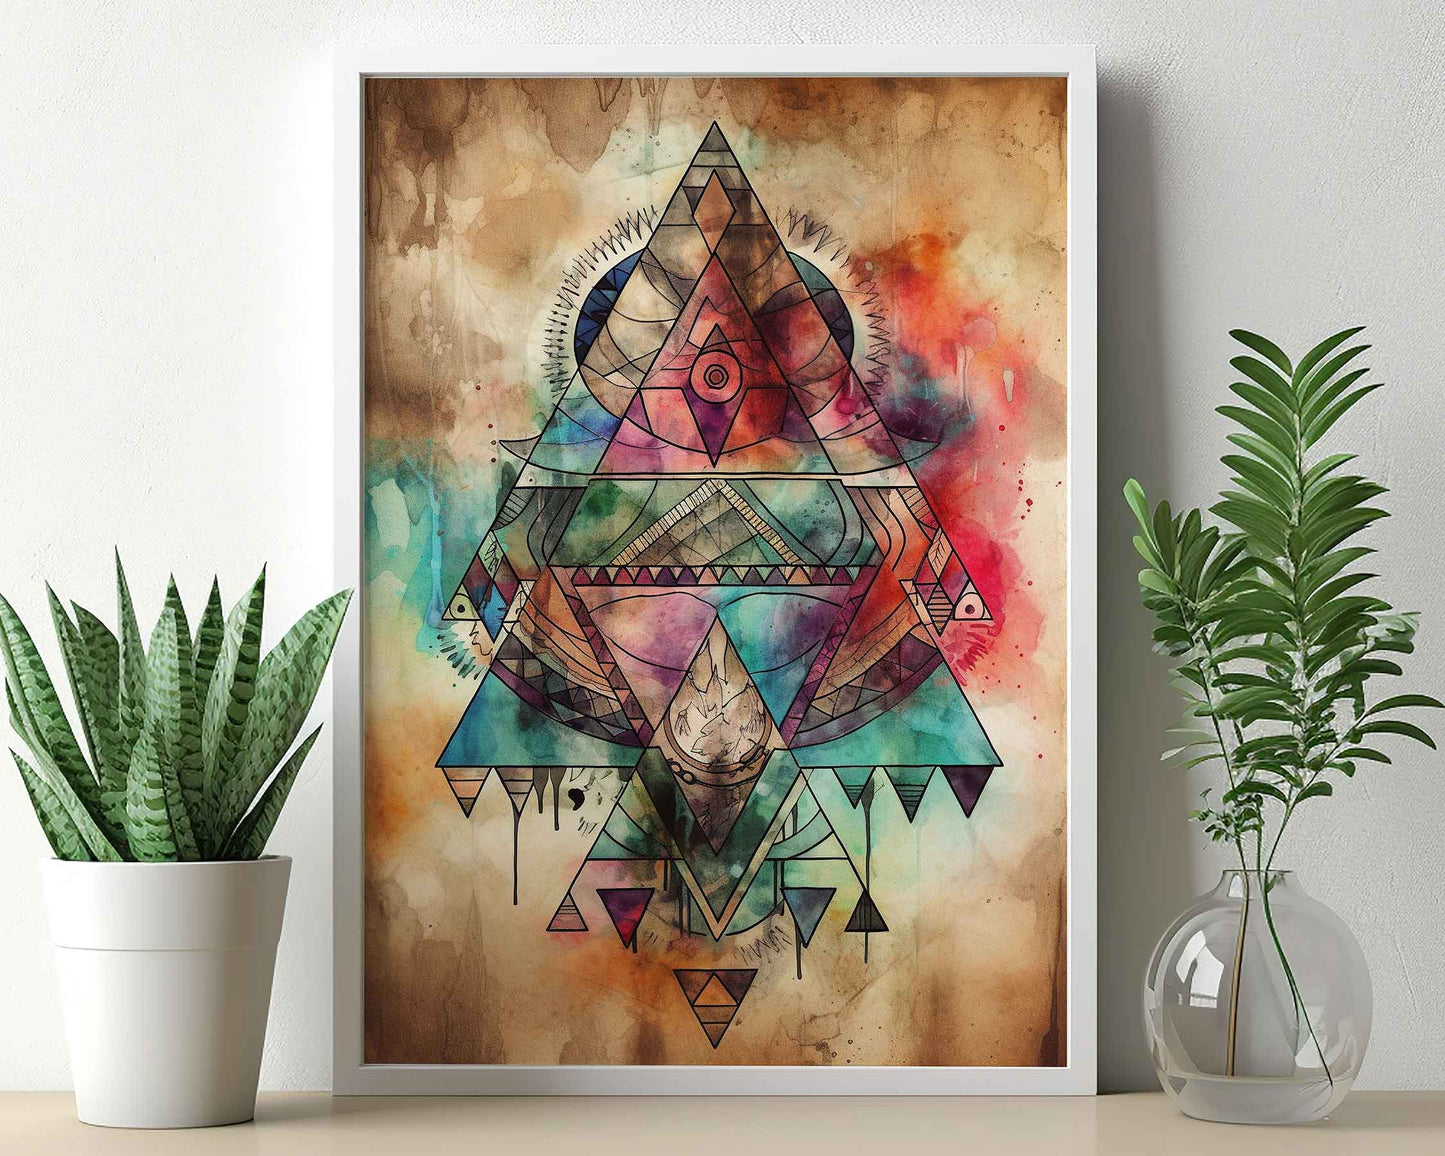 Framed Image of Boho Geometric Tribal Abstract Aztec Style Wall Art Poster Prints